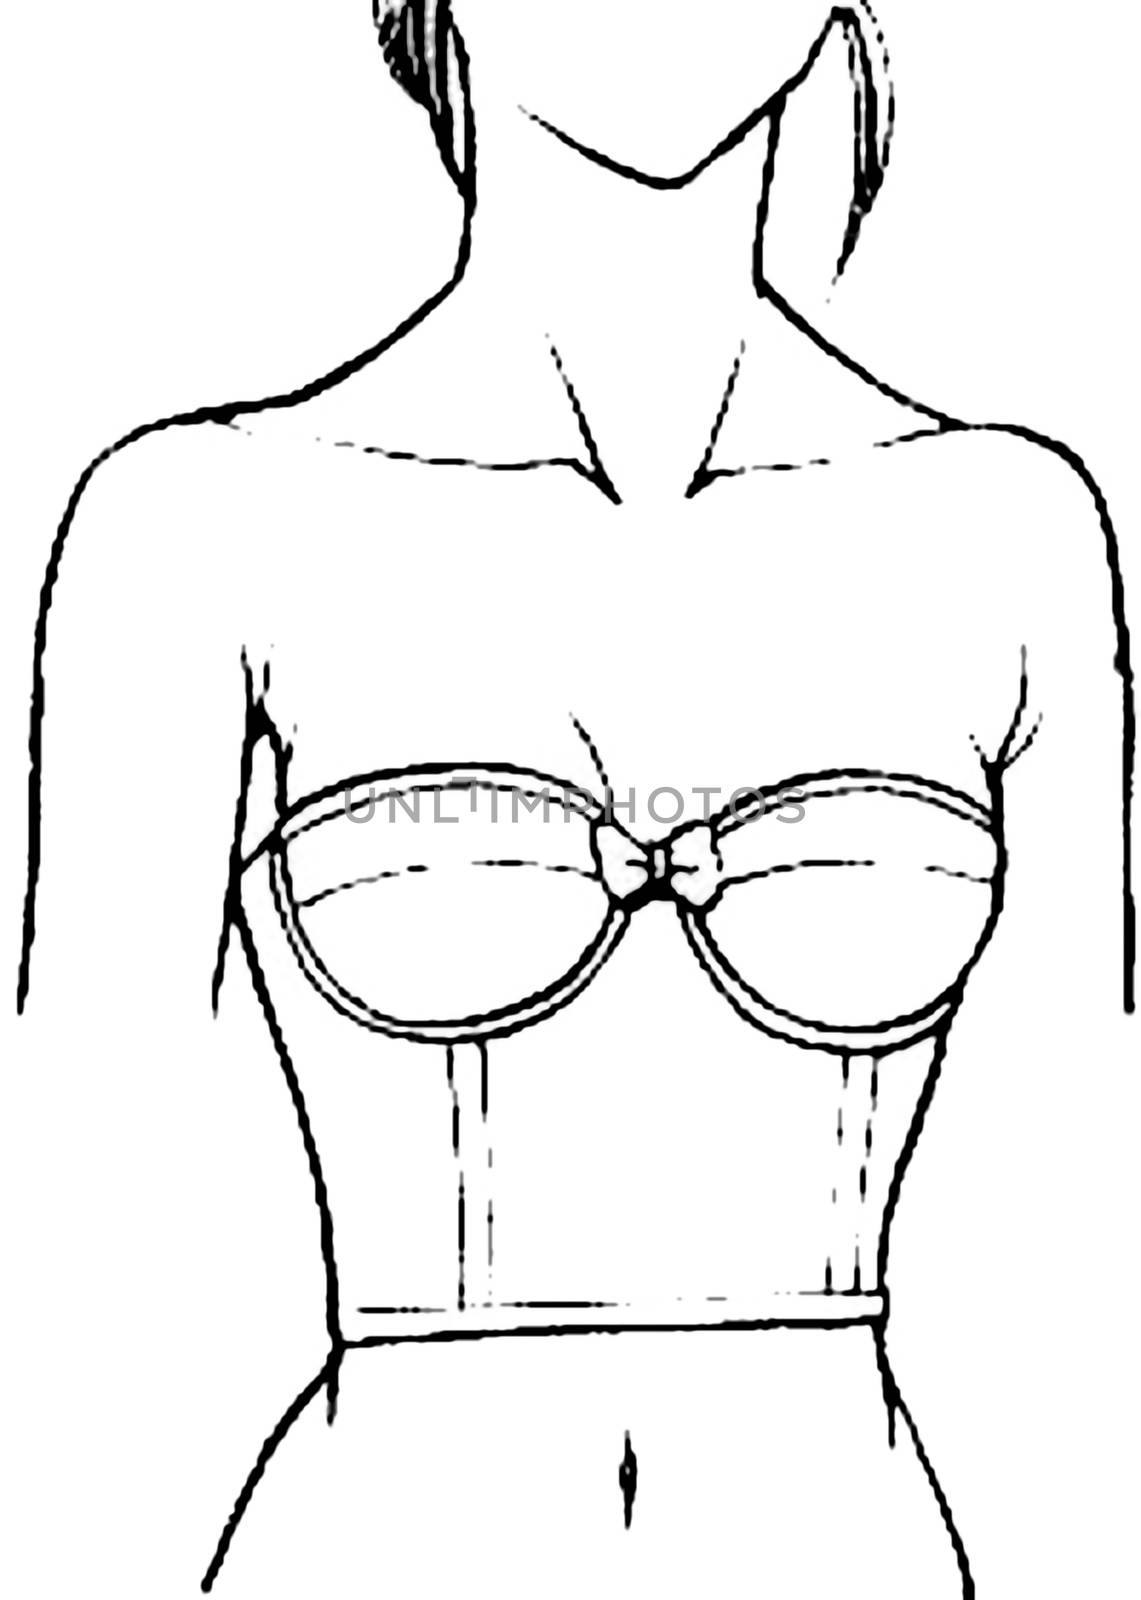 Female breast drawing tutorial. Drawing a woman's body with an emphasis on breasts. by DePo